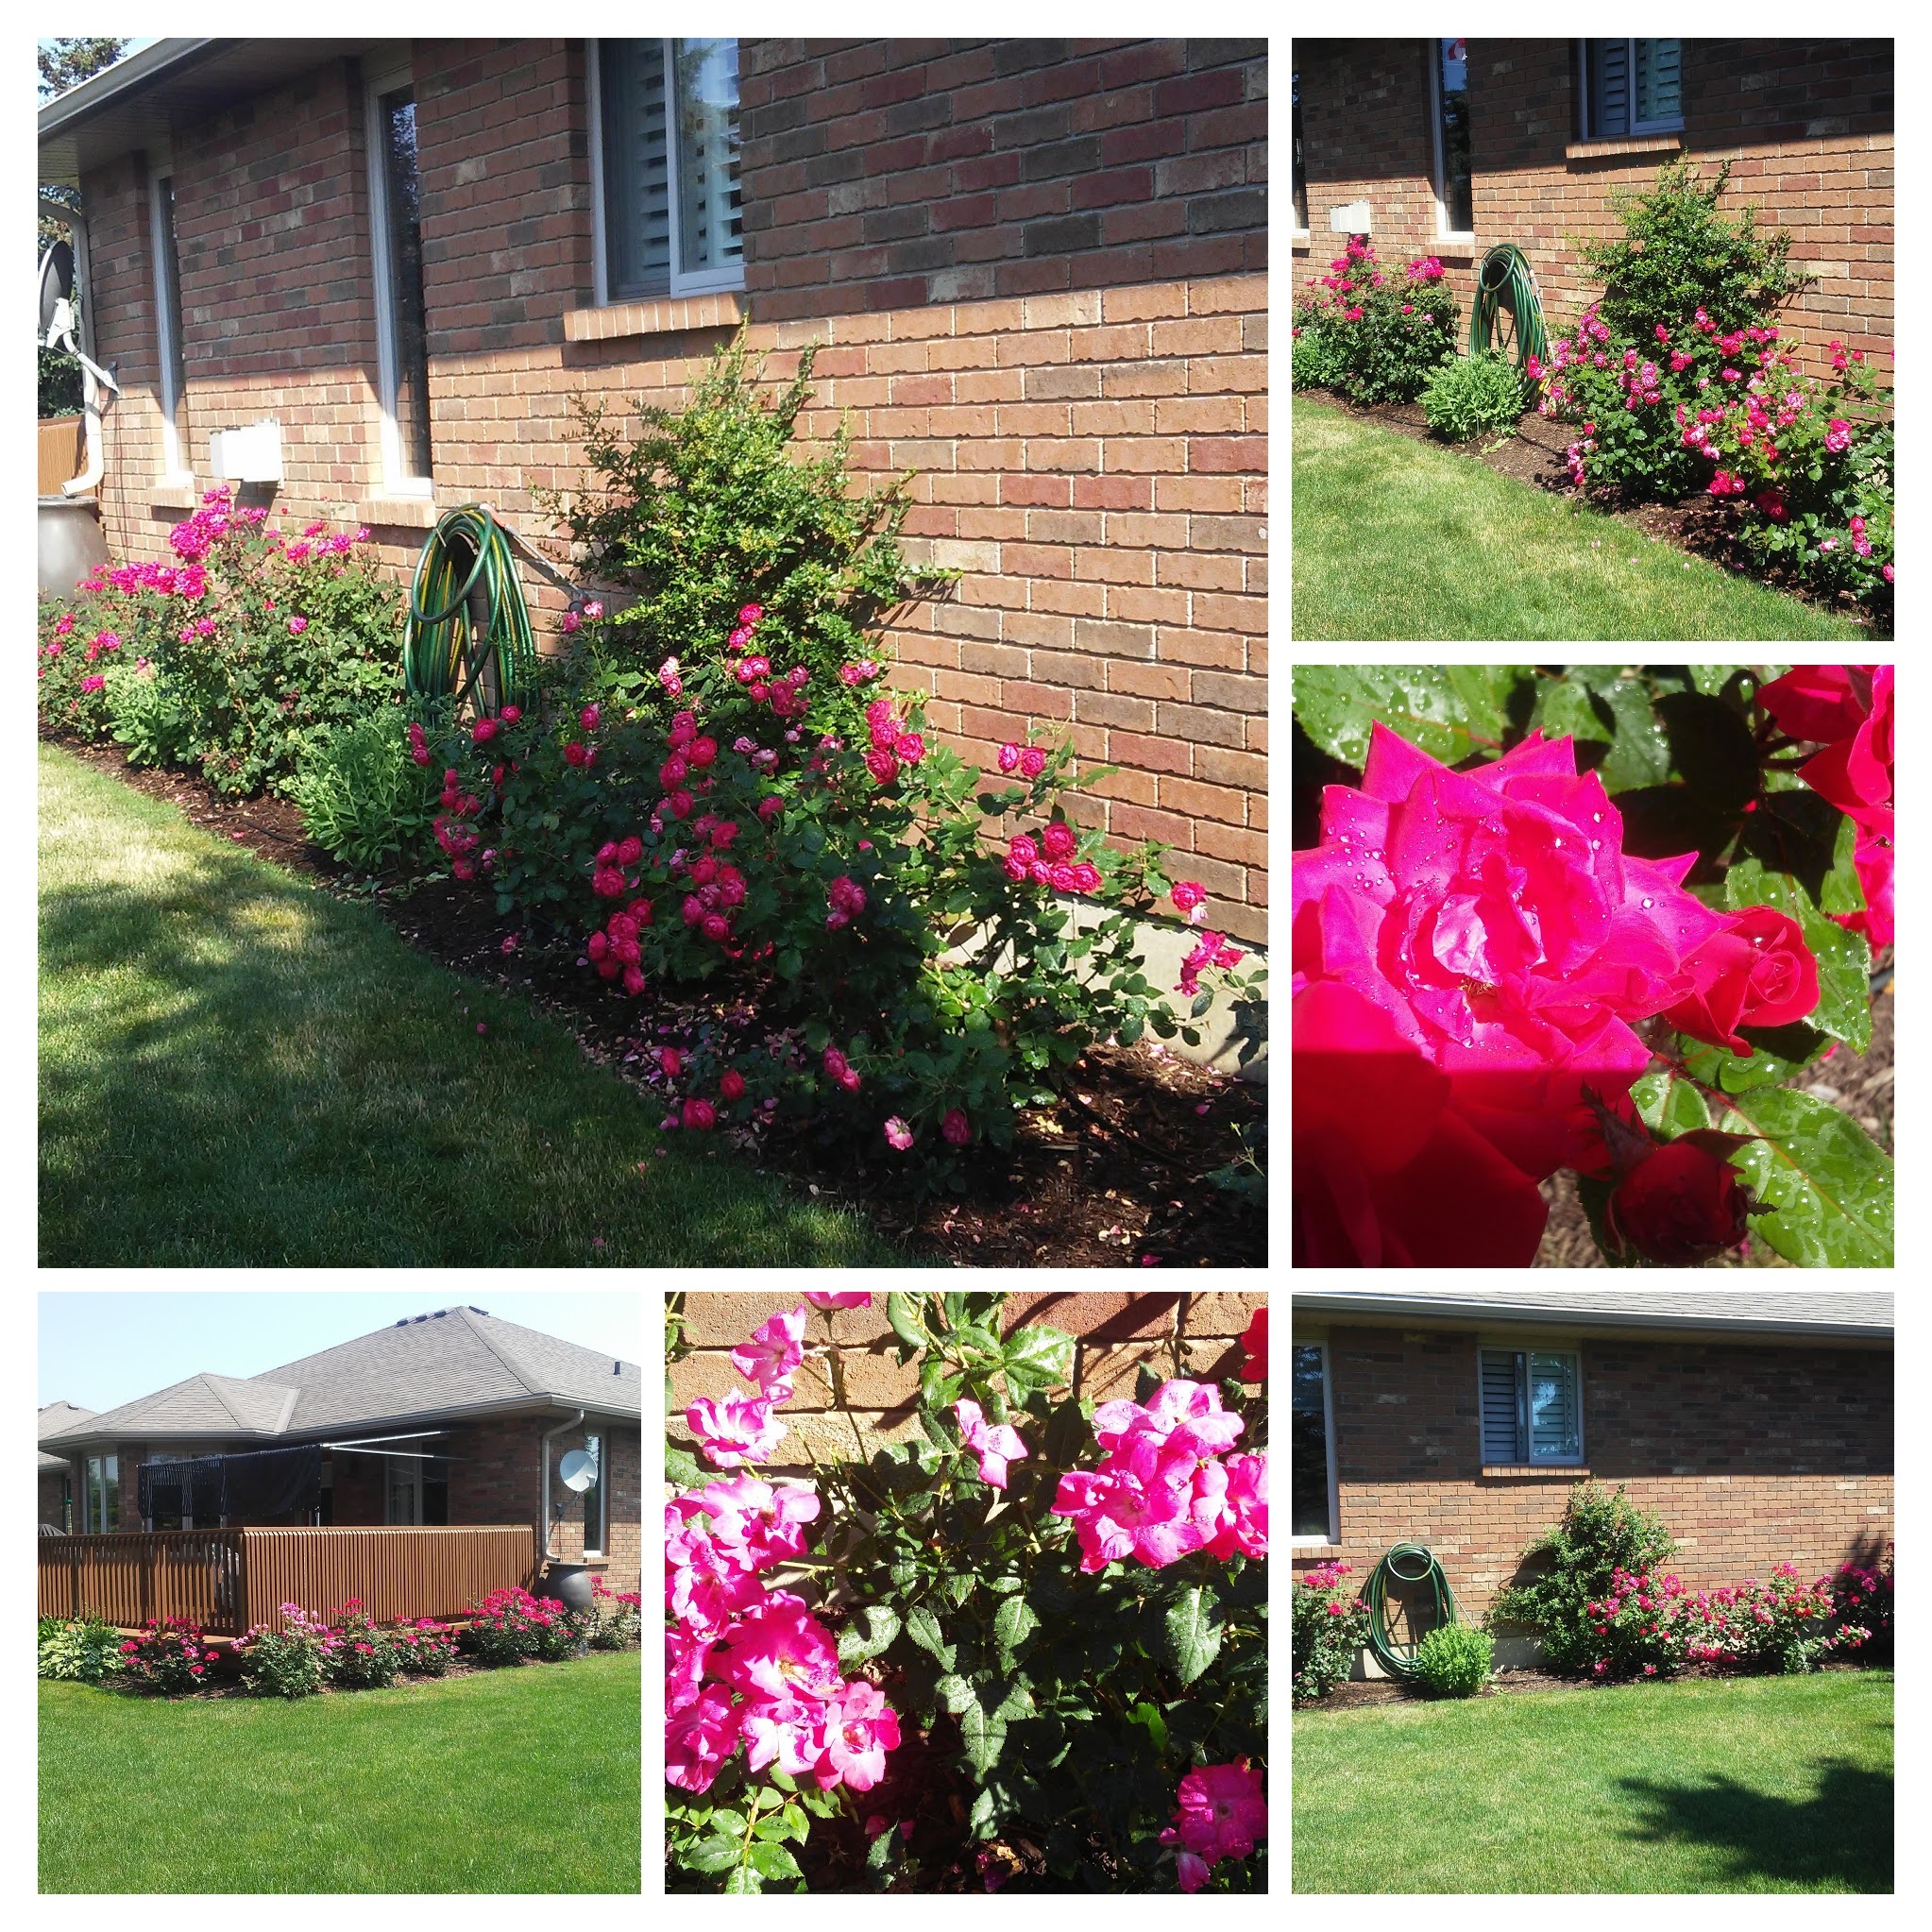 Flower bed care results in healthy, lush foliage and flowers